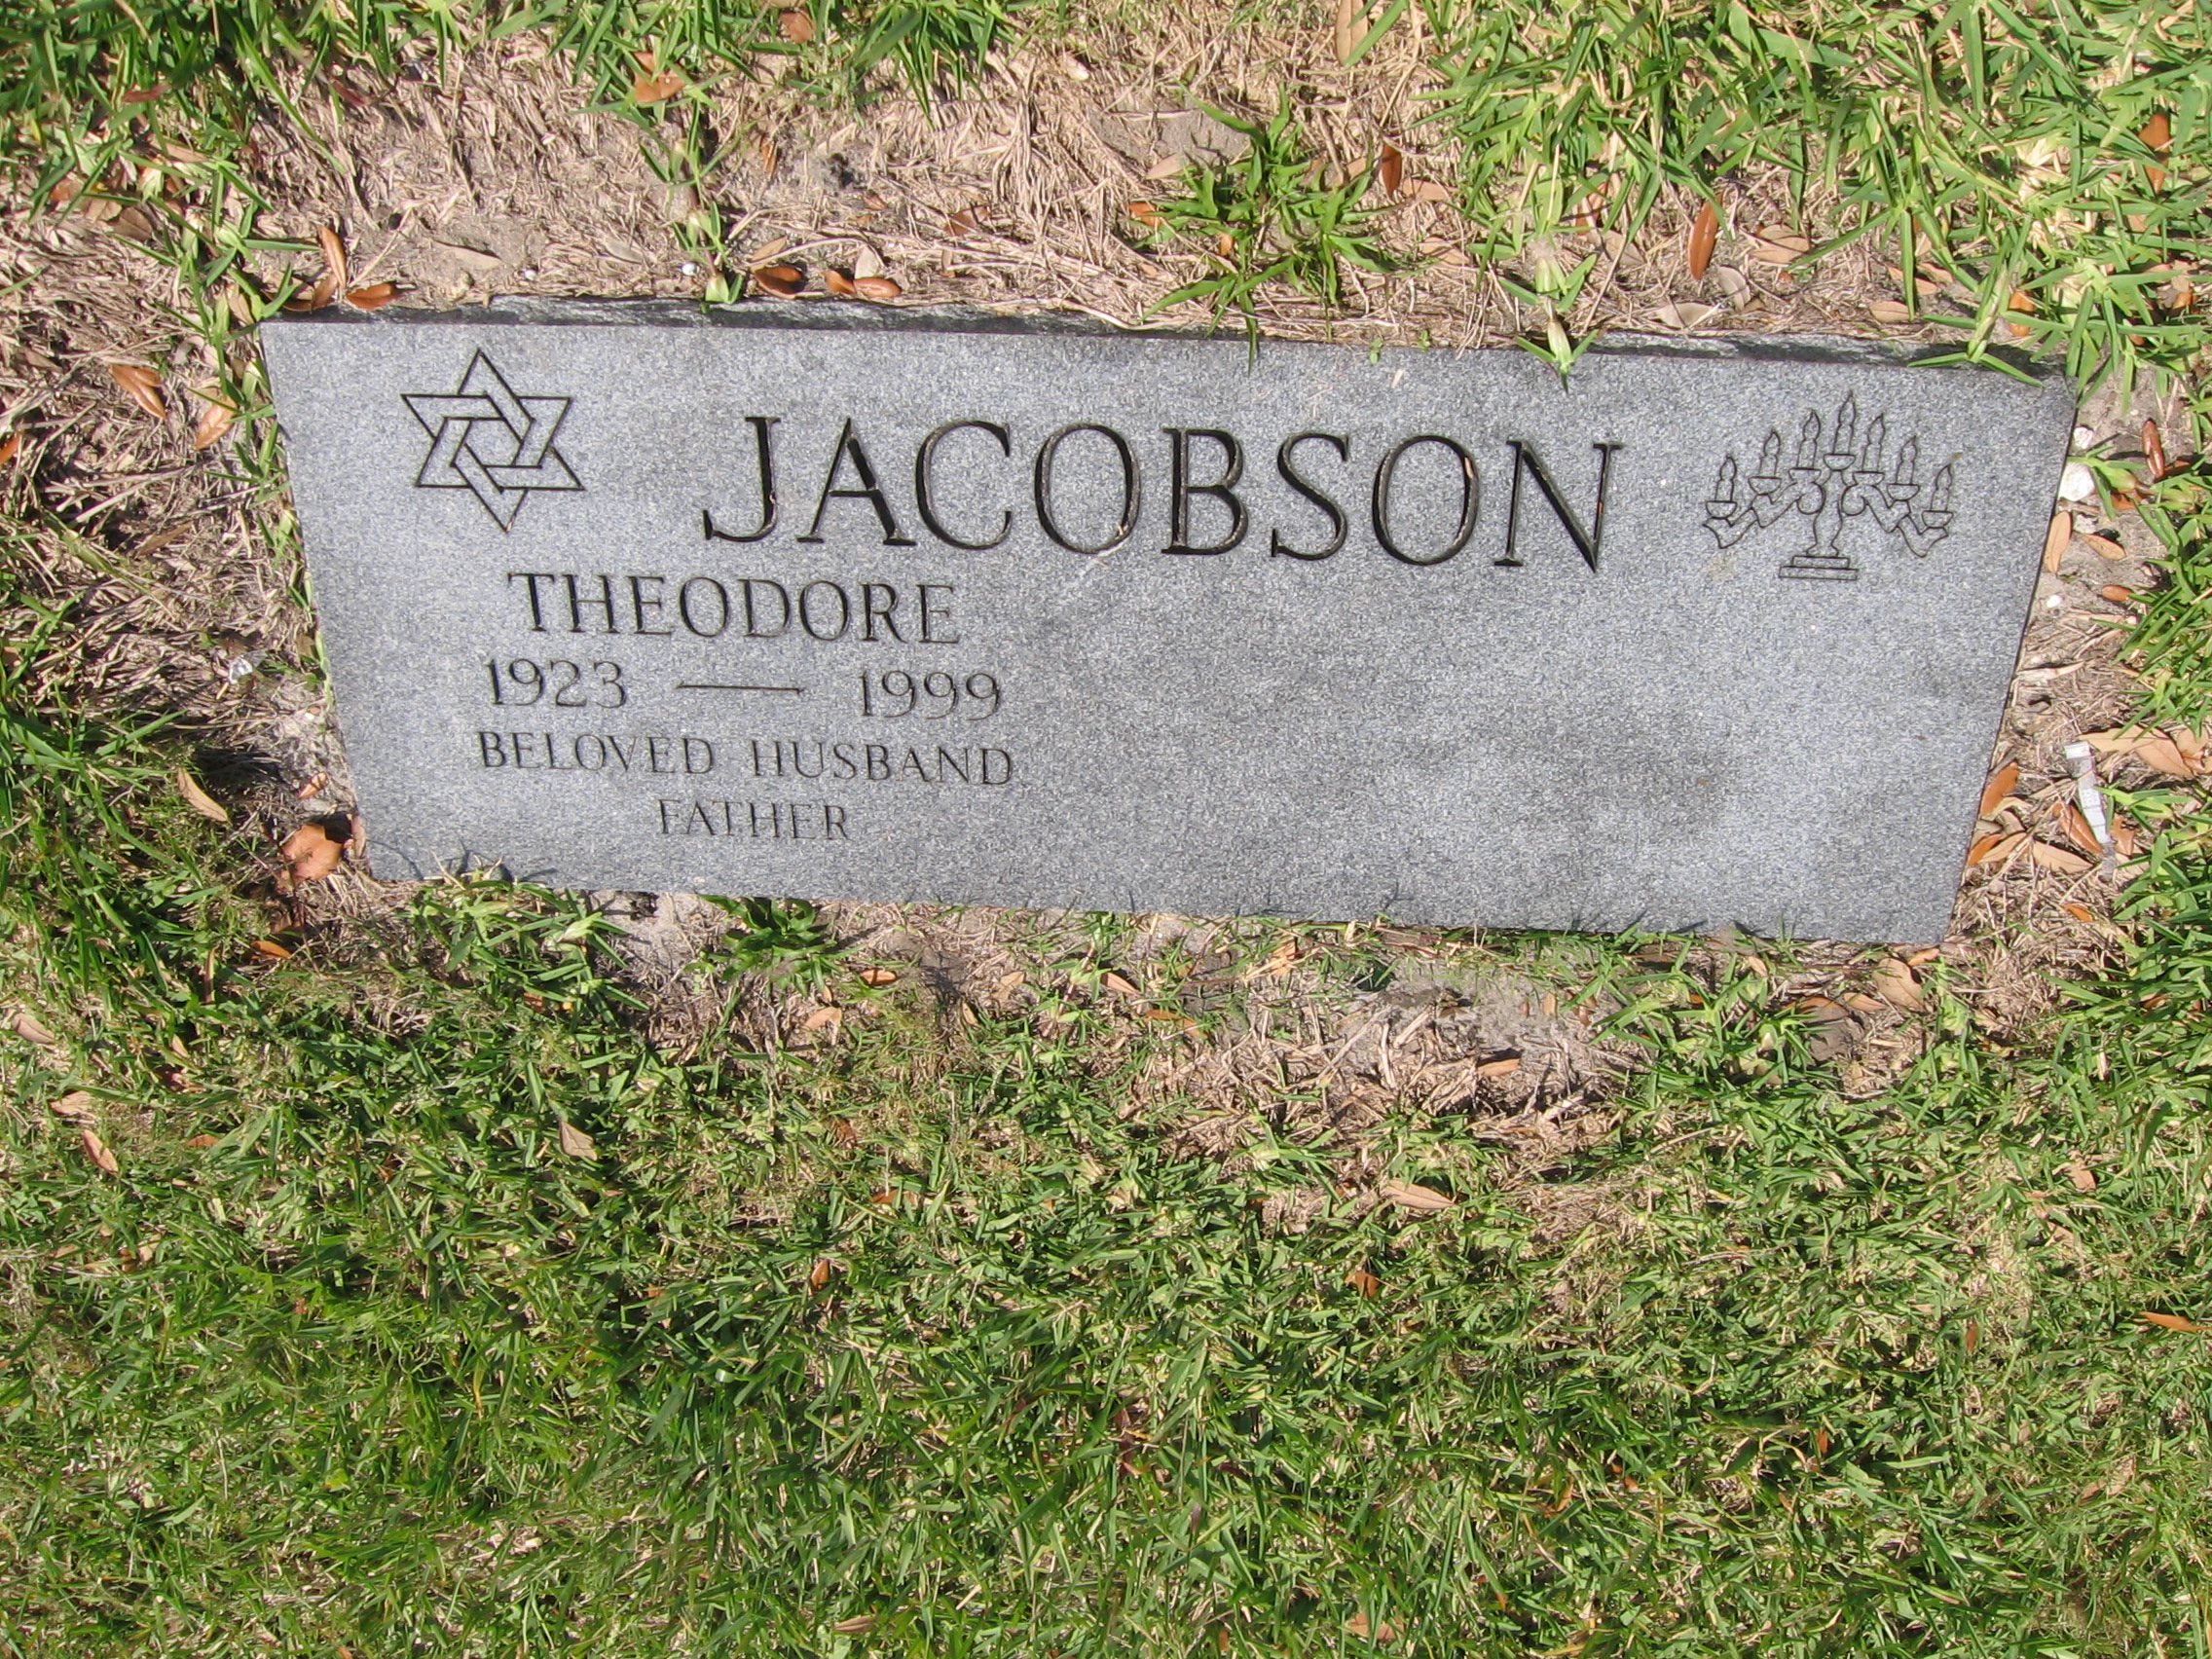 Theodore Jacobson